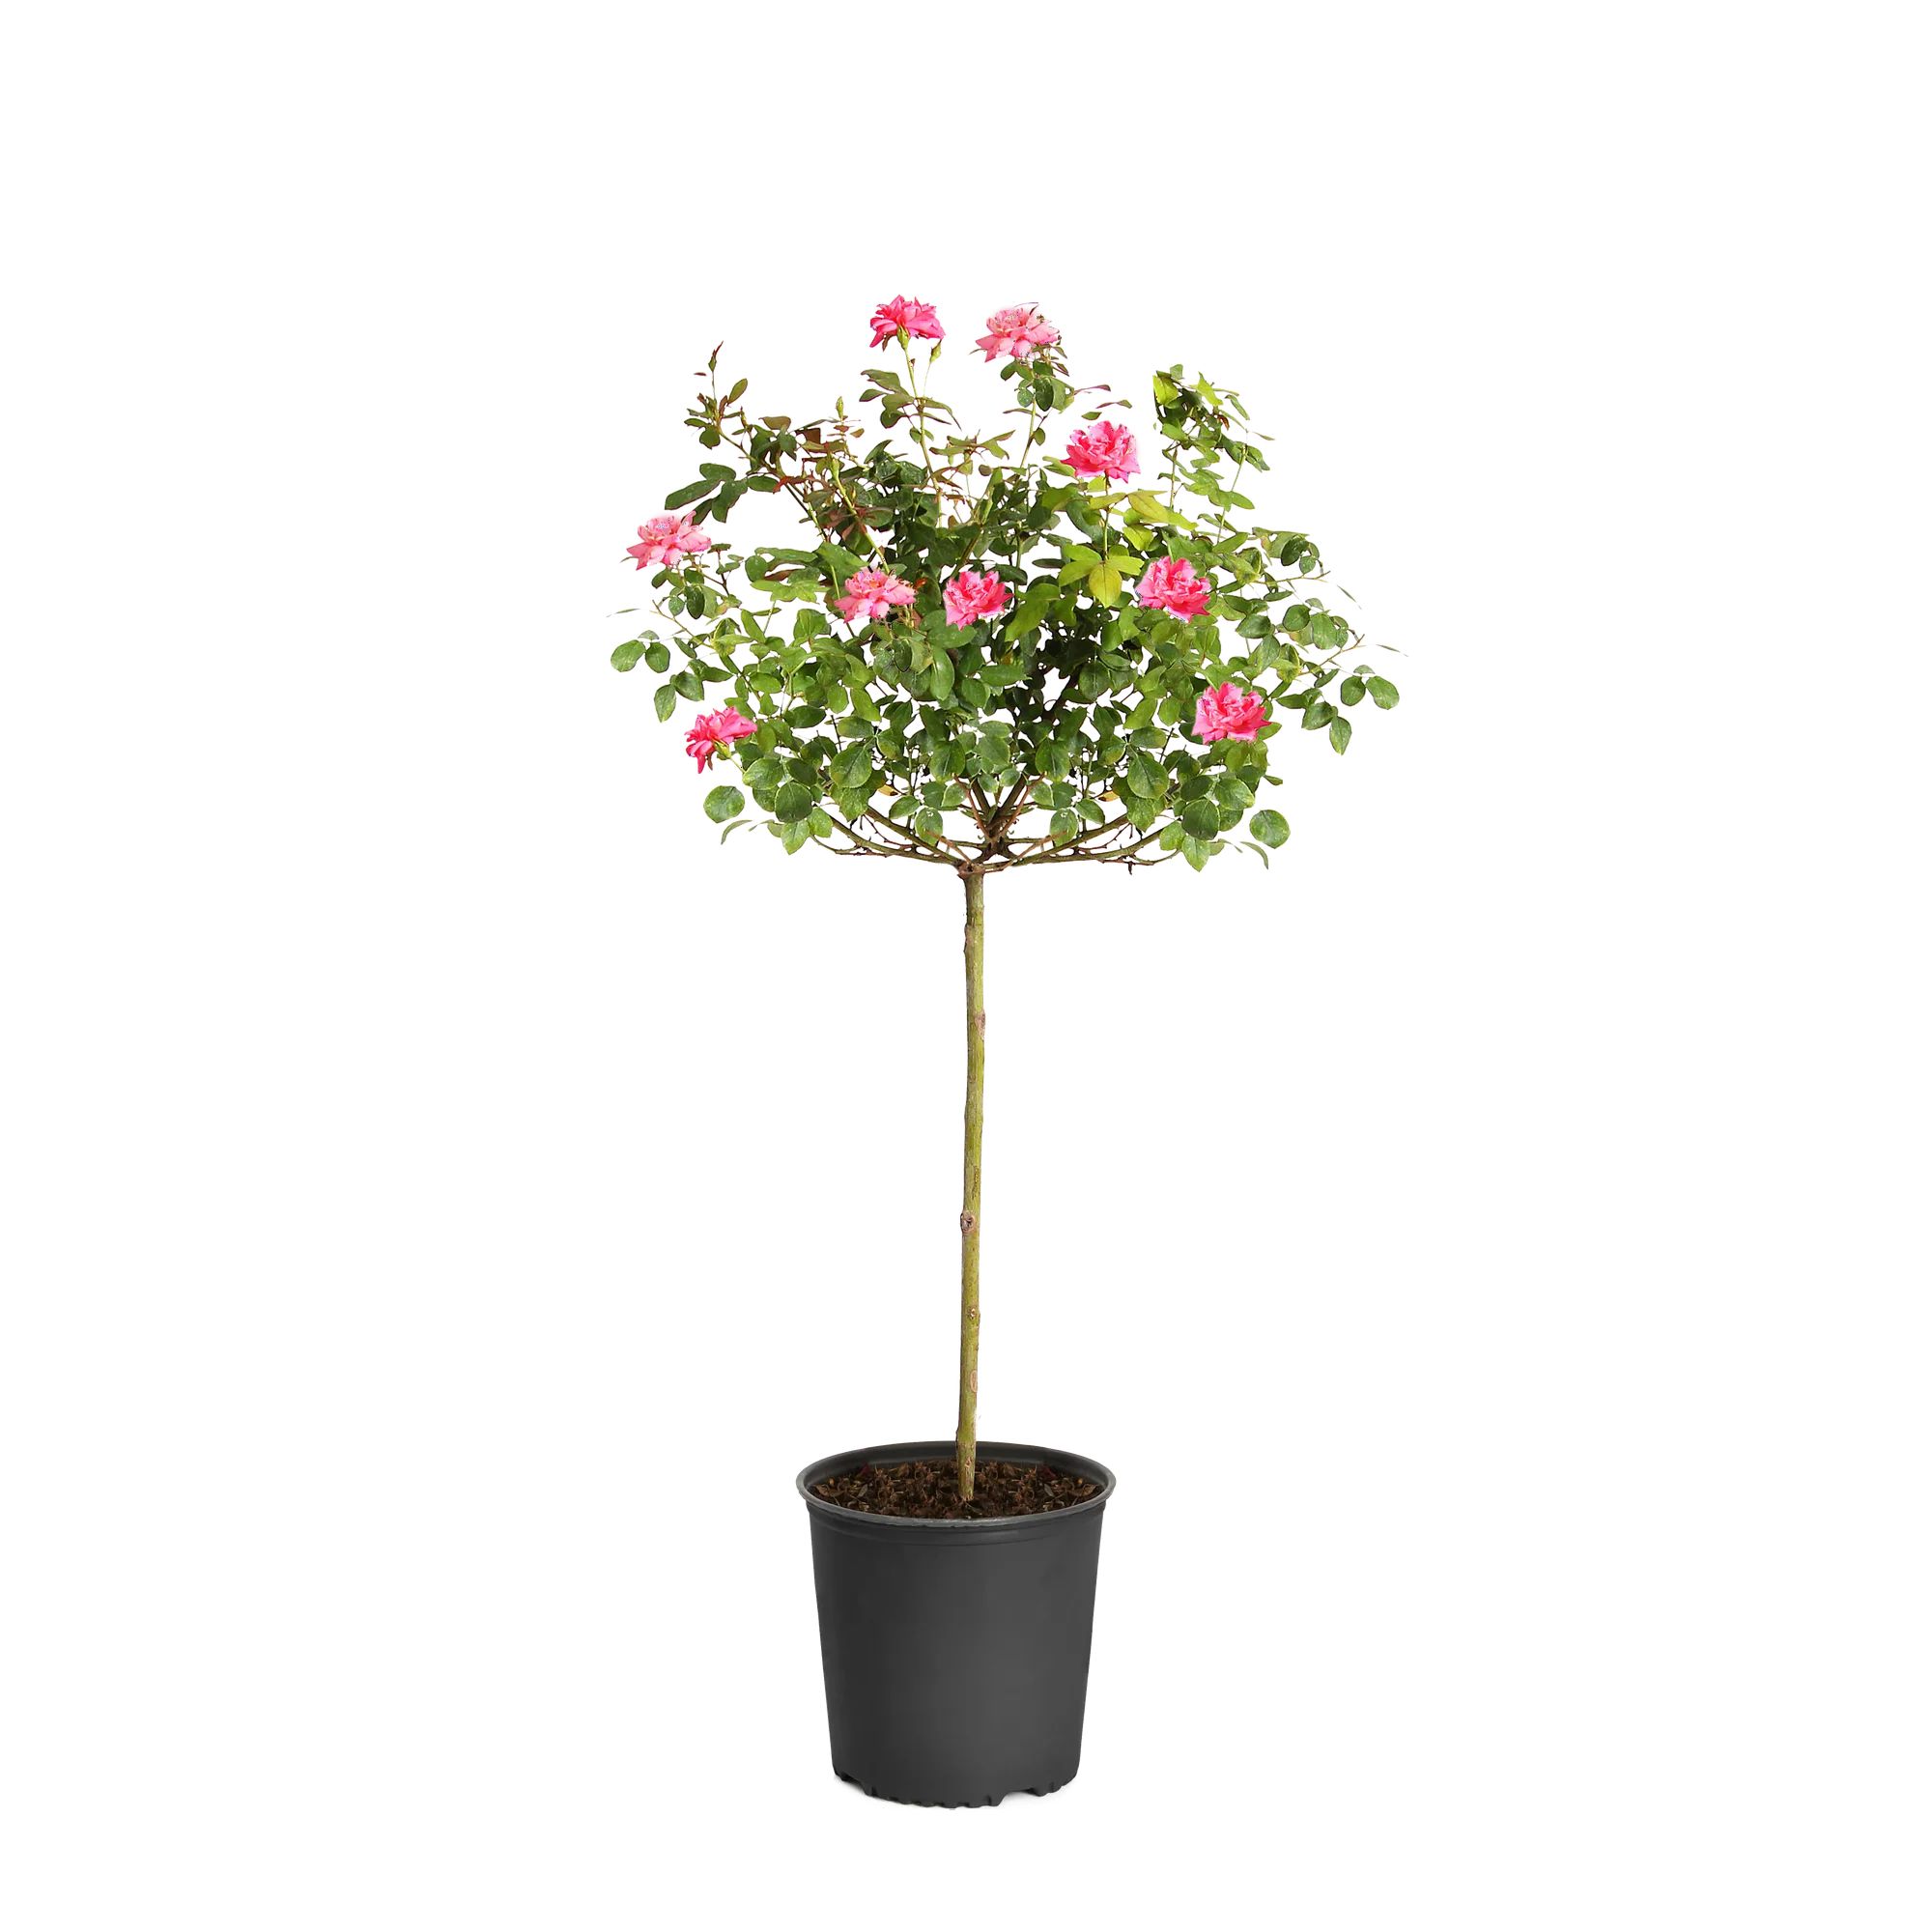 Brighter Blooms - Pink Knock Out Rose Tree, 3-4 ft. - No Shipping To AZ | Walmart (US)